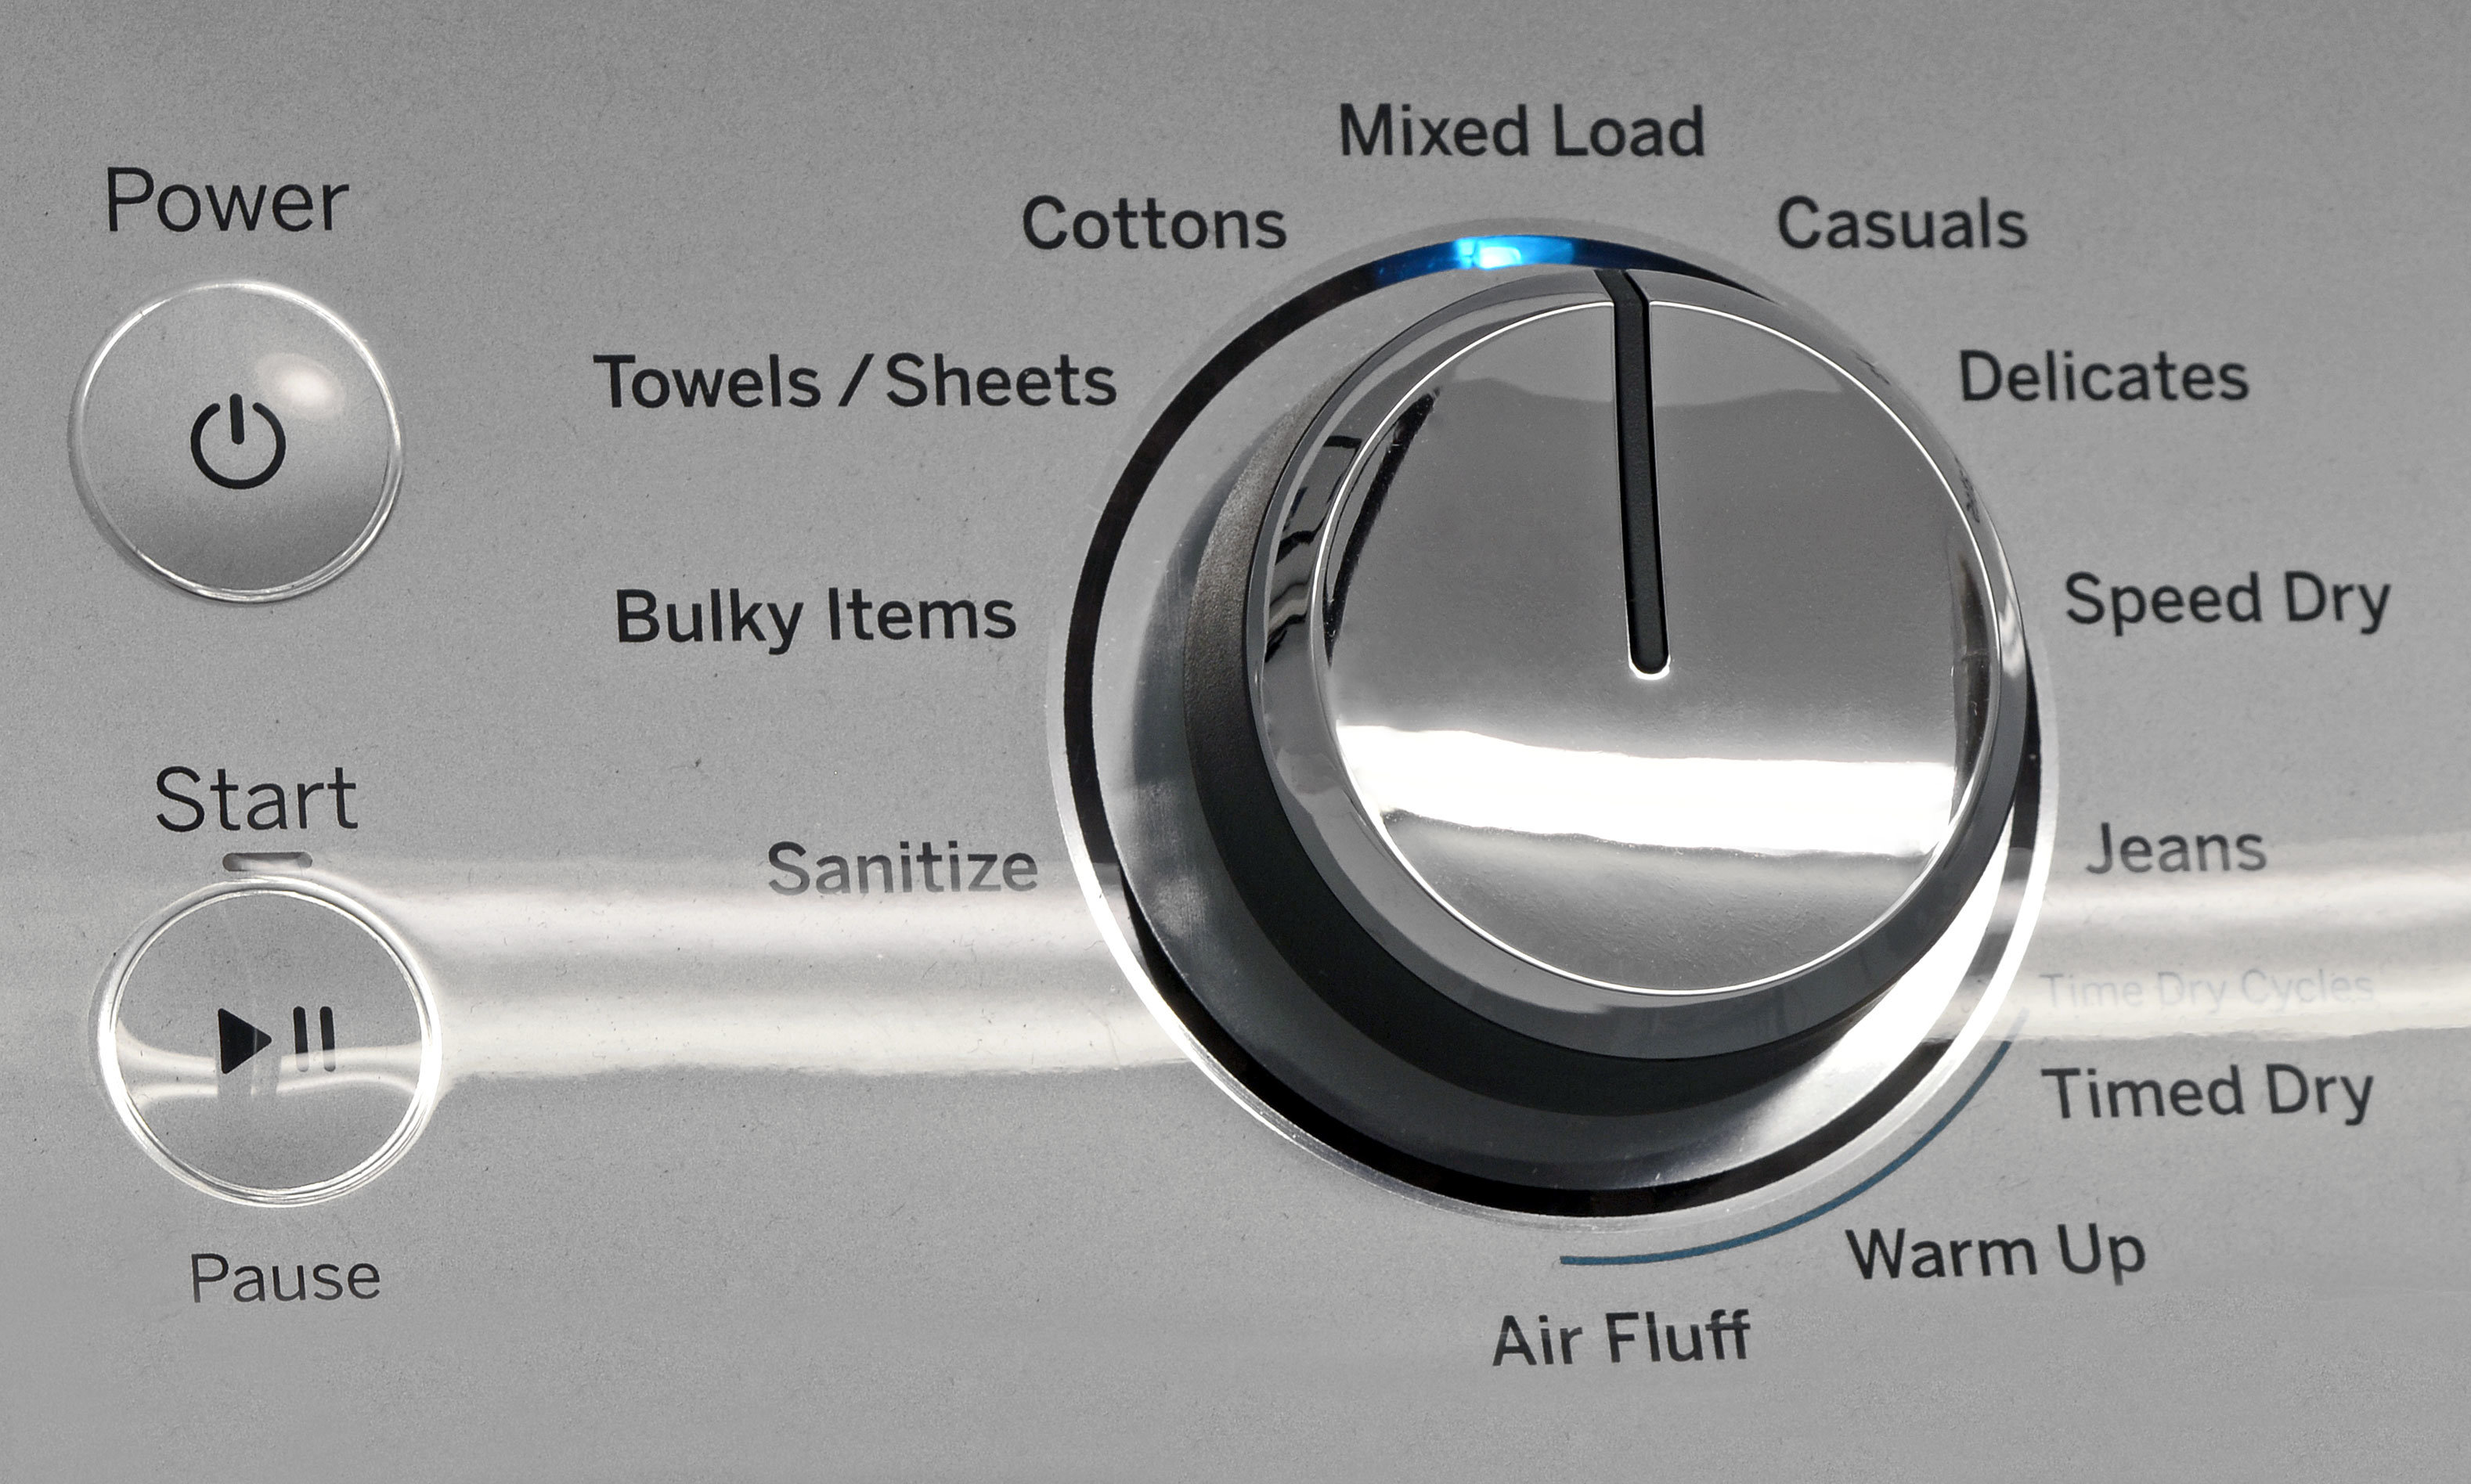 What are the different dryer cycles?